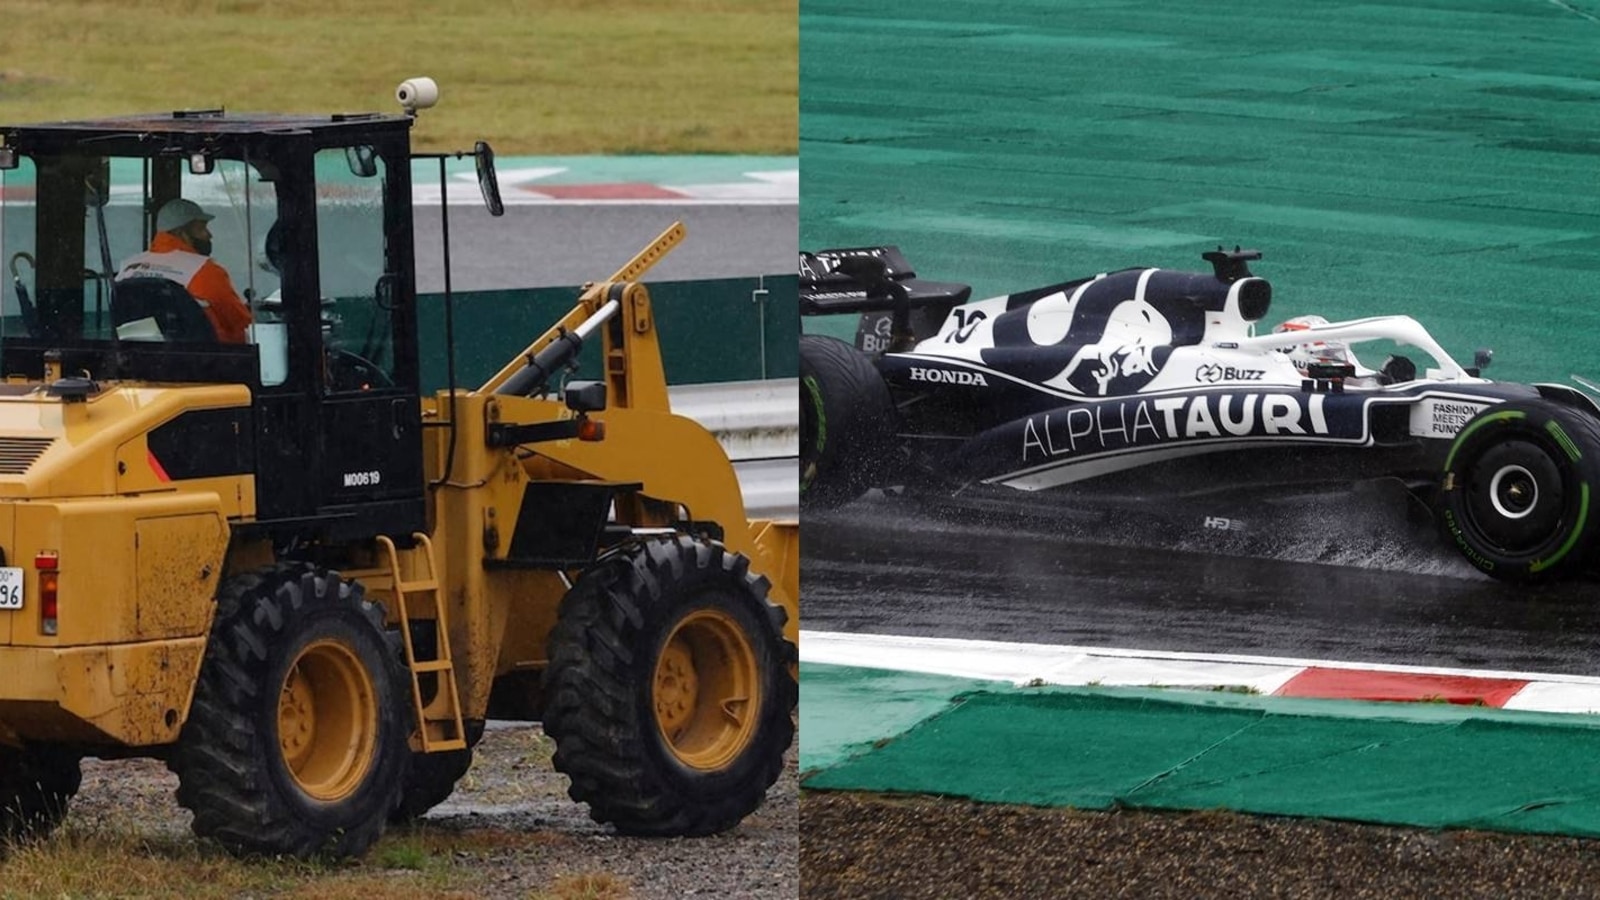 Formula 1 drivers left fuming due to tractor on track in Japanese GP - Watch